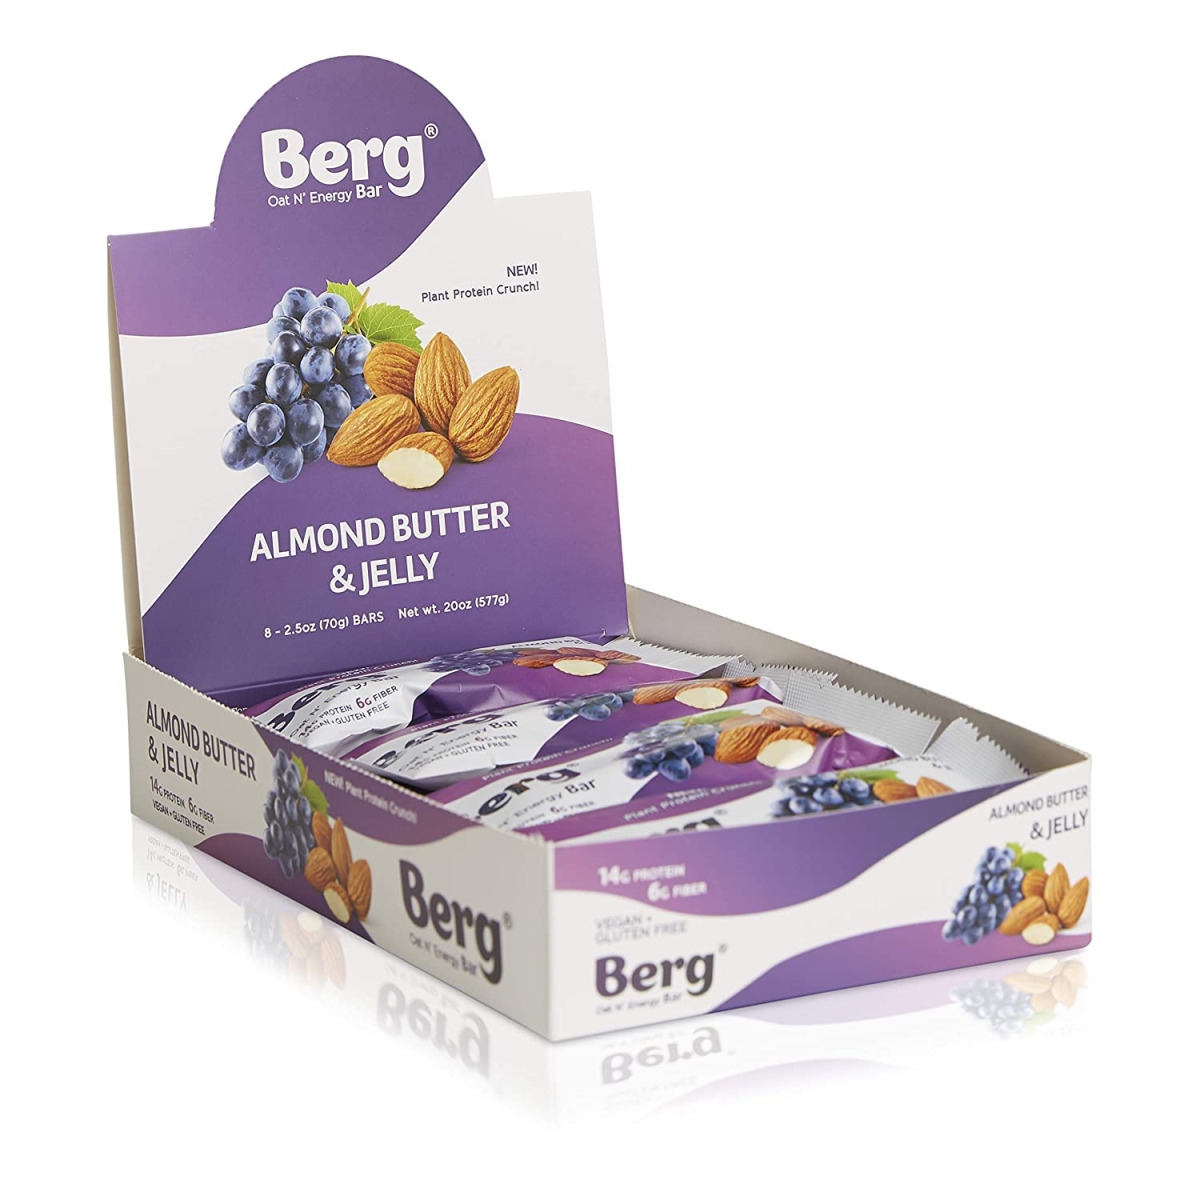 Picture of Spectrum Water 1680001 Berg Bar Almond Butter & Jelly - 8 per Box